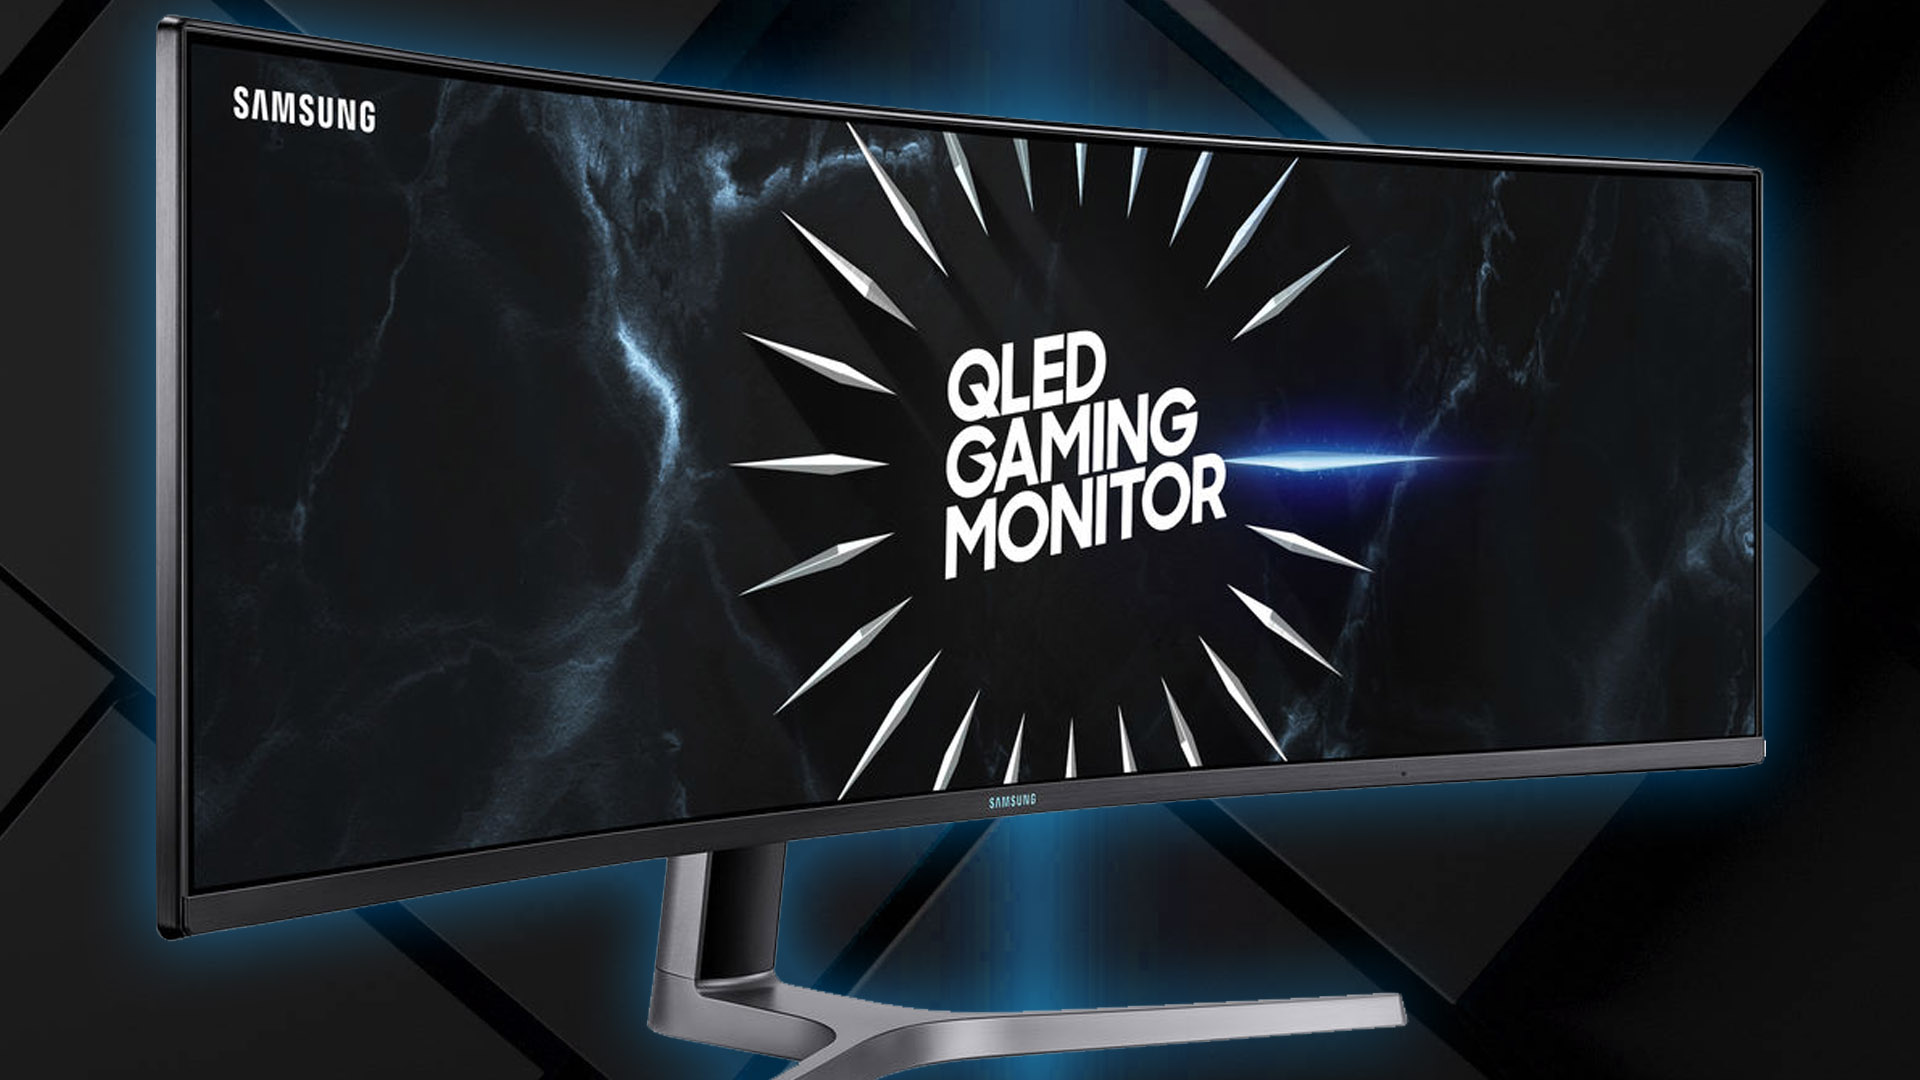 Get a giant 49-inch Samsung ultrawide monitor for just $700